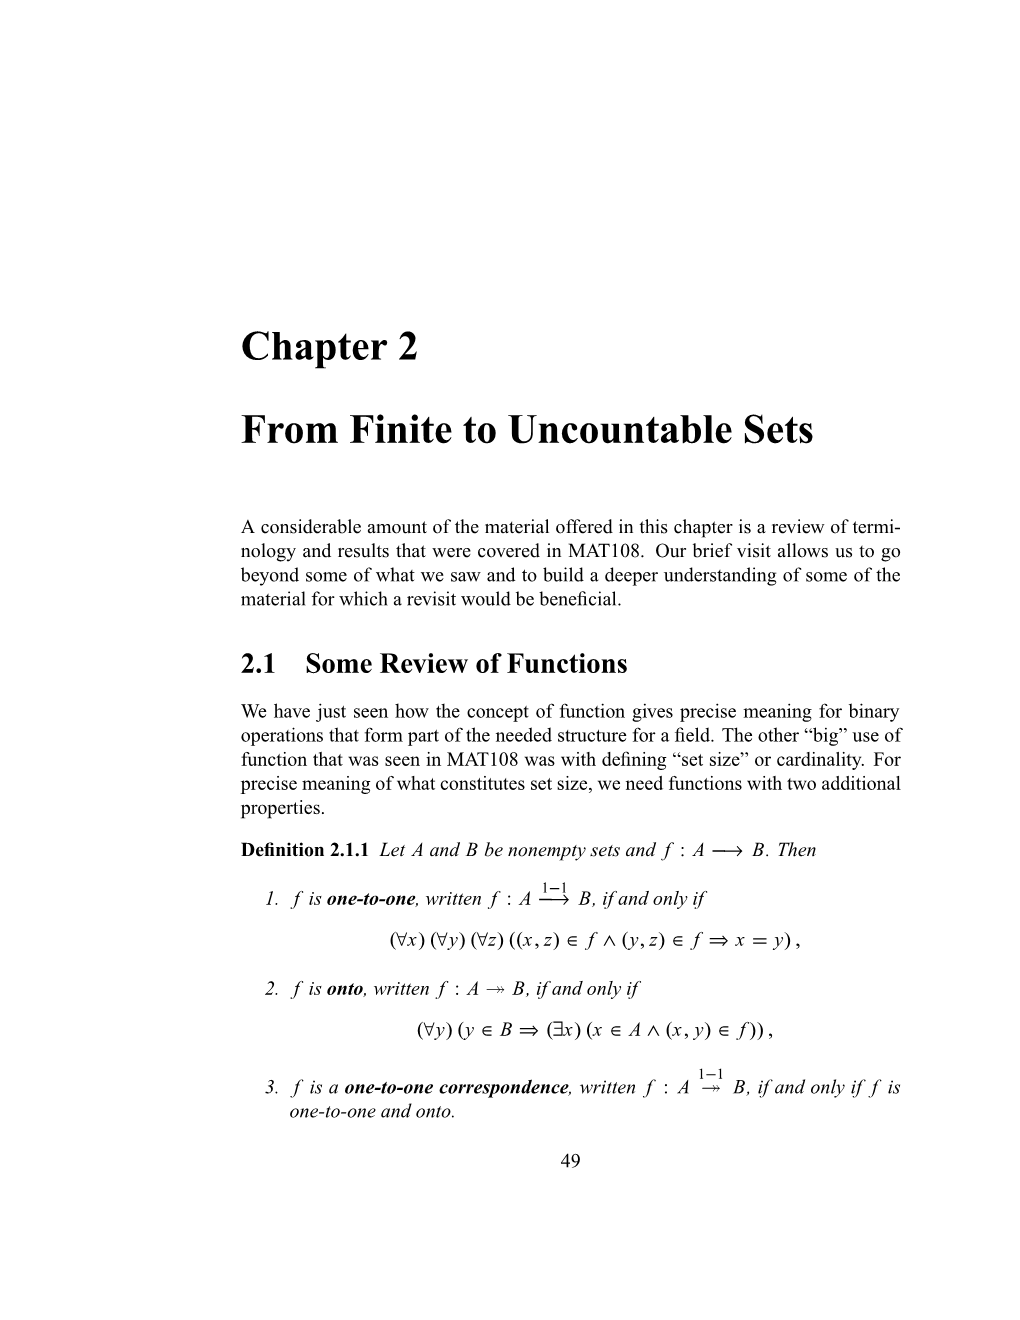 Chapter 2 from Finite to Uncountable Sets